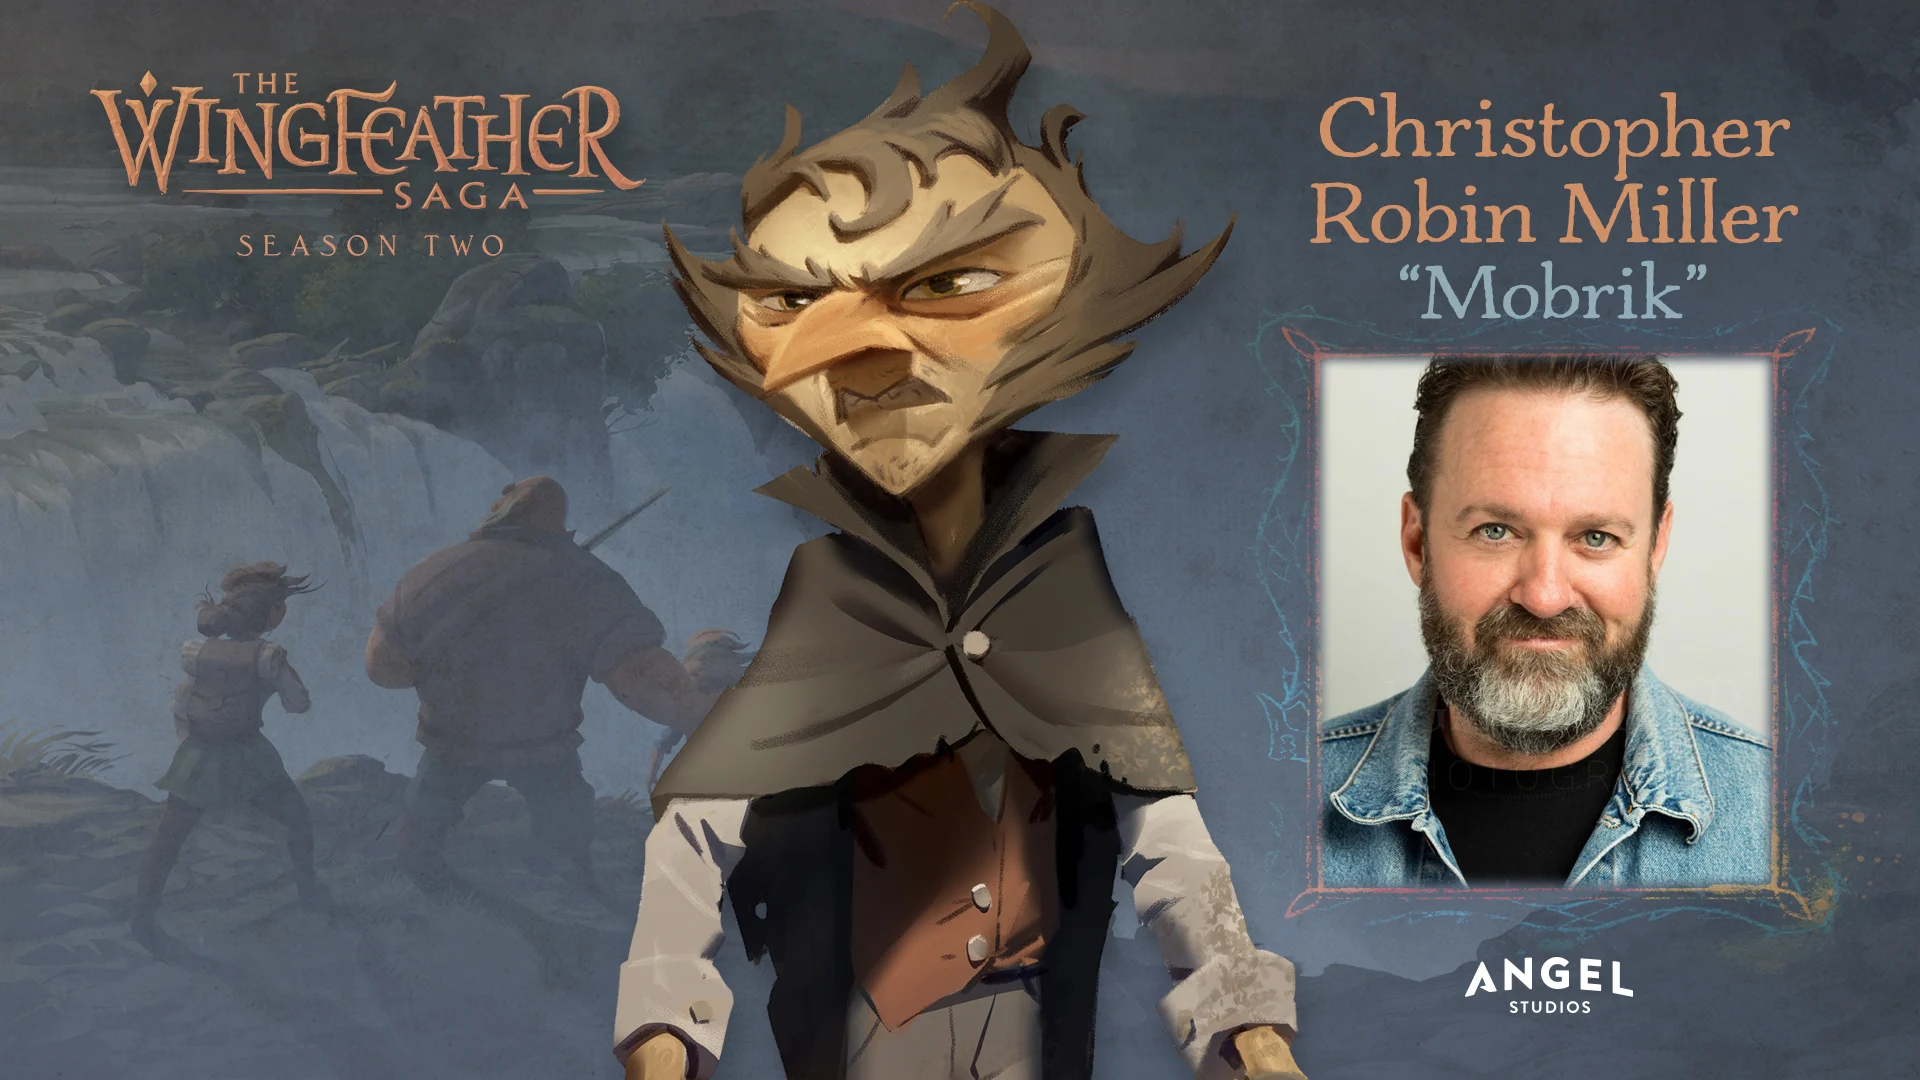 Image of Christopher Robin Miller Character Announcement